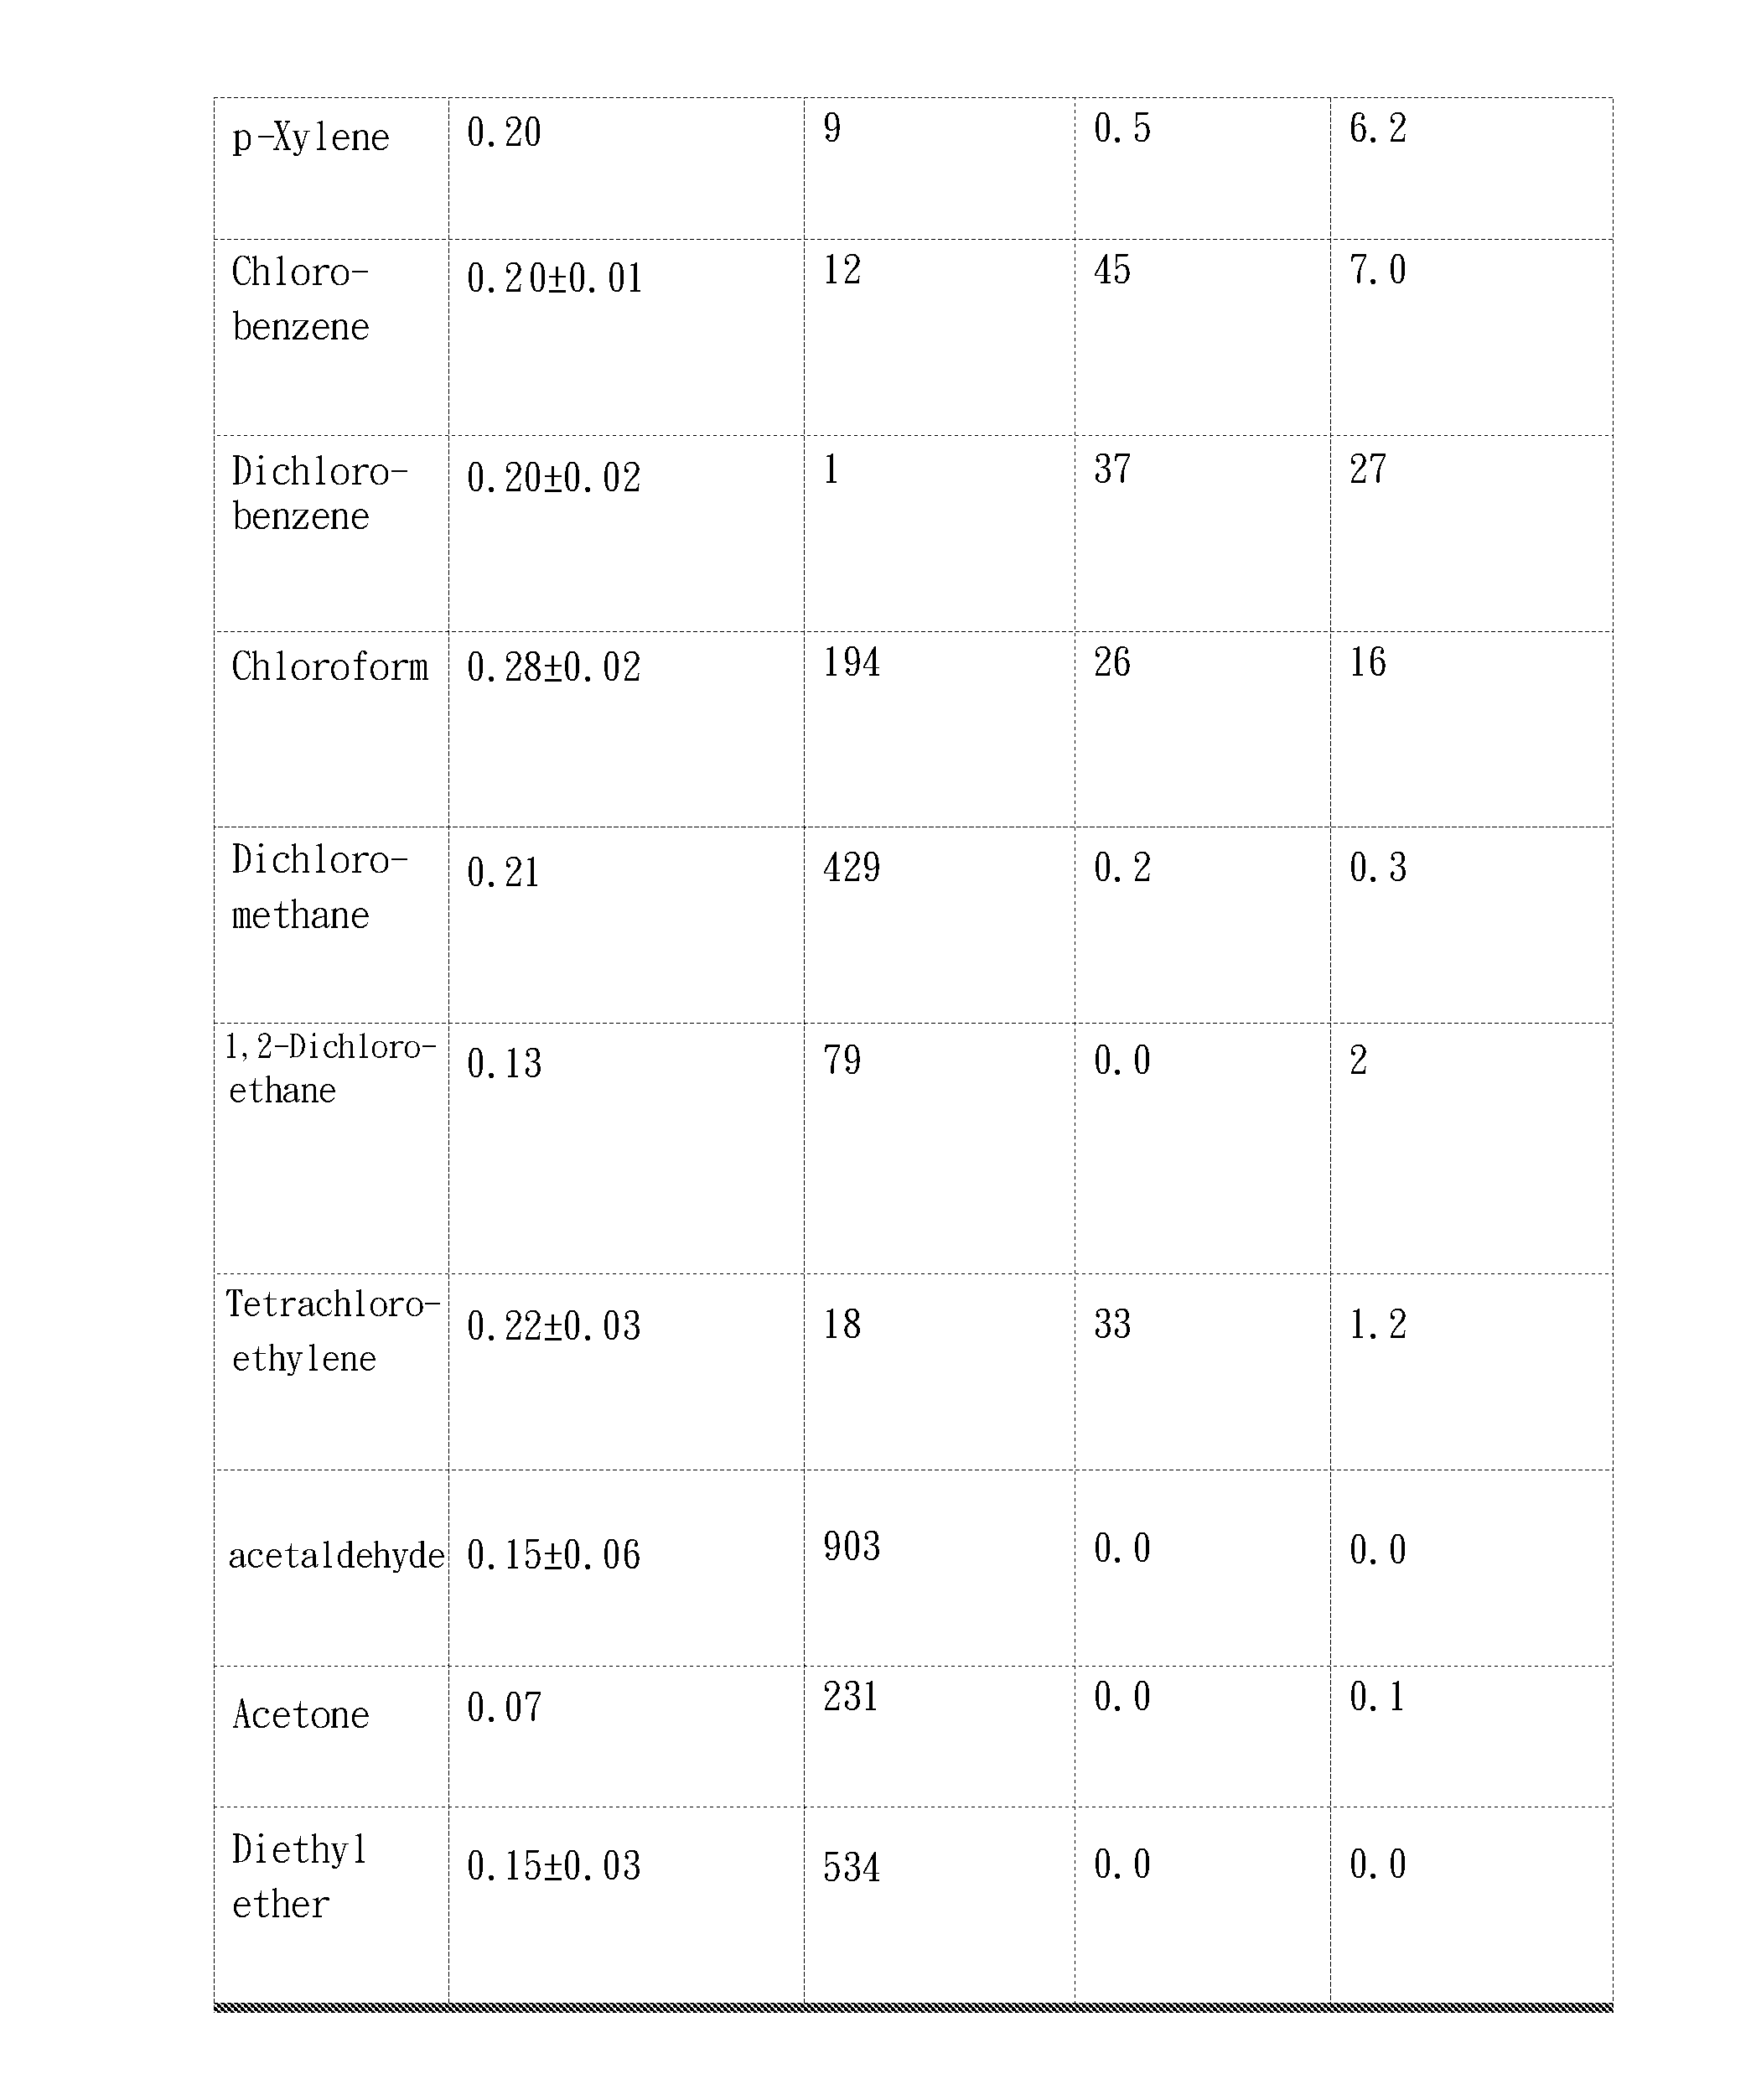 System for detecting volatile organic compounds and the method for forming the same and utility thereof